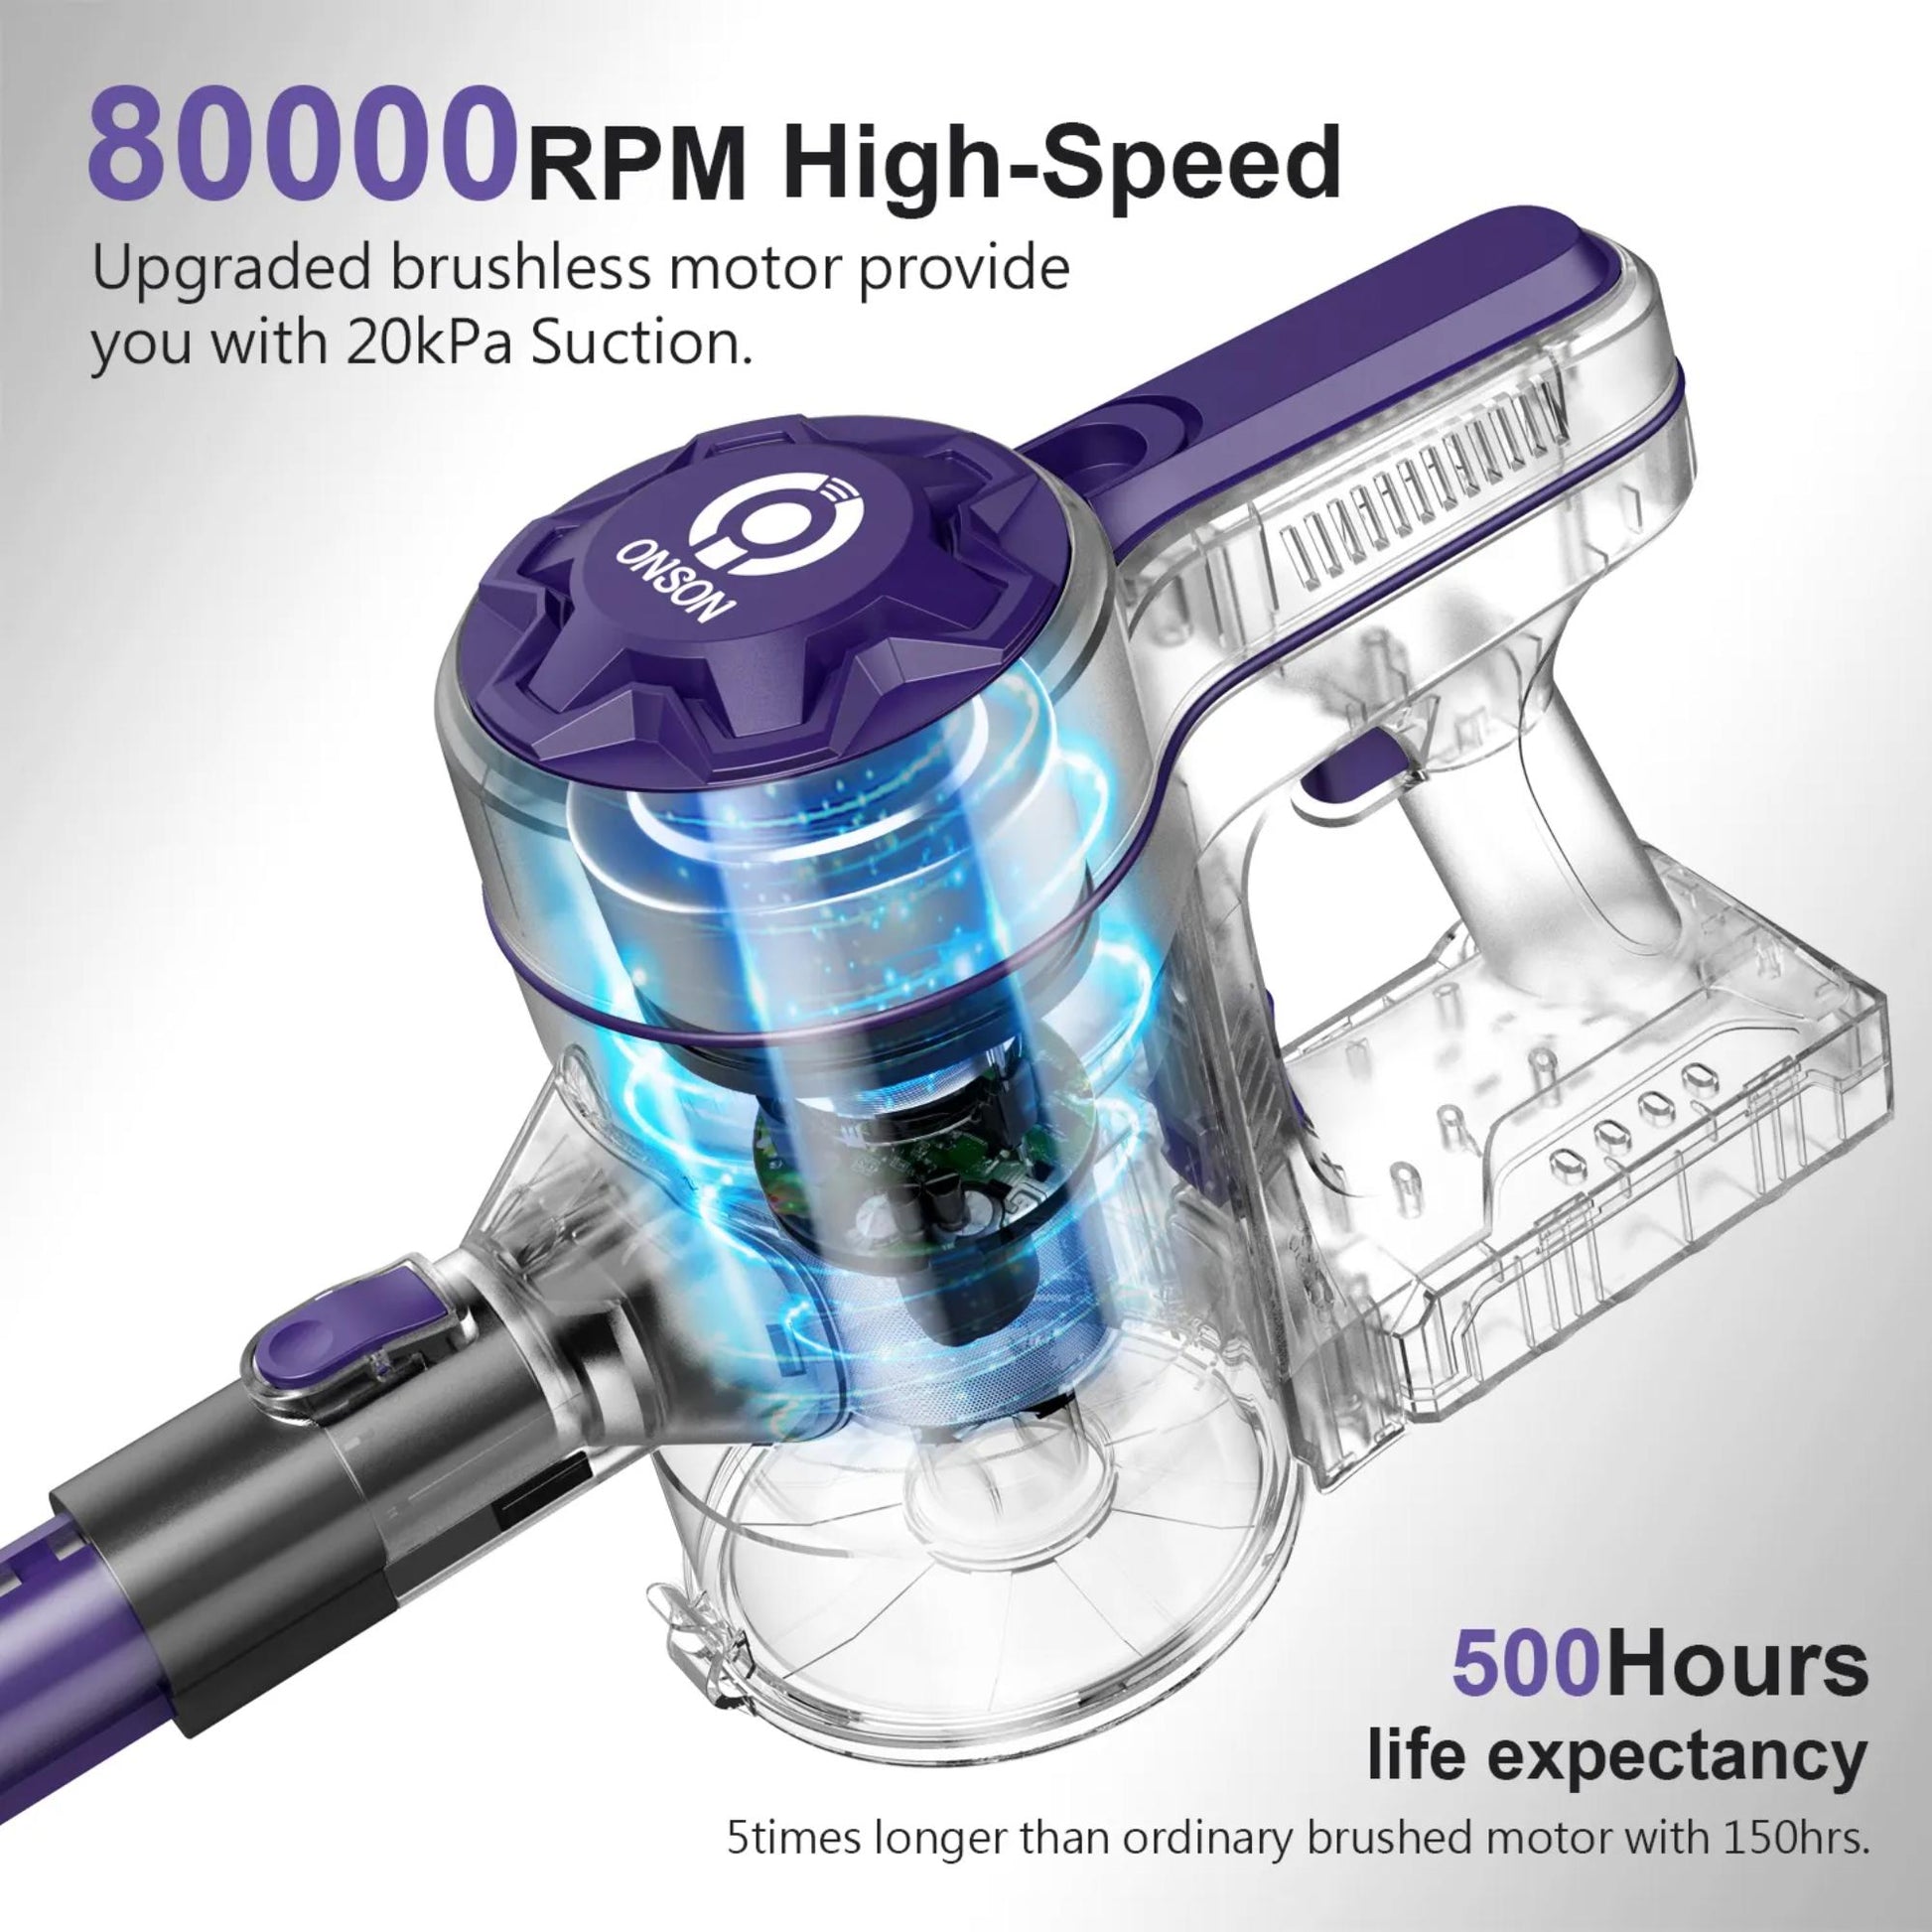 ONSON A10 Stick Vacuum Cleaner with 80000 RPM High-Speed. | Blue Chilli Electronics.